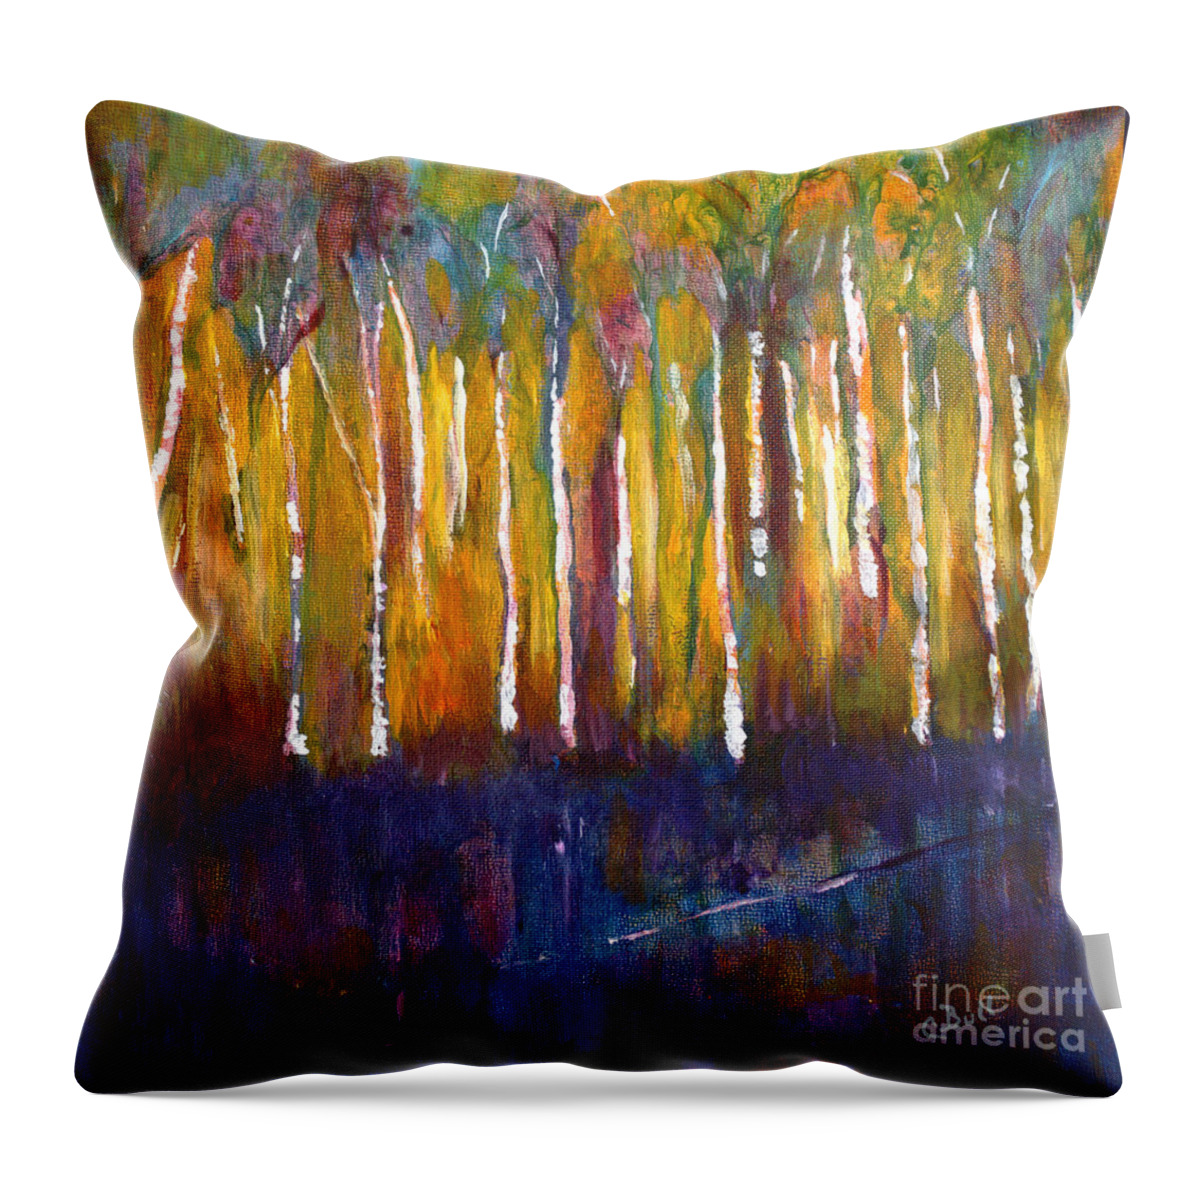 Muskoka Throw Pillow featuring the painting Oak Bay Woods by Claire Bull